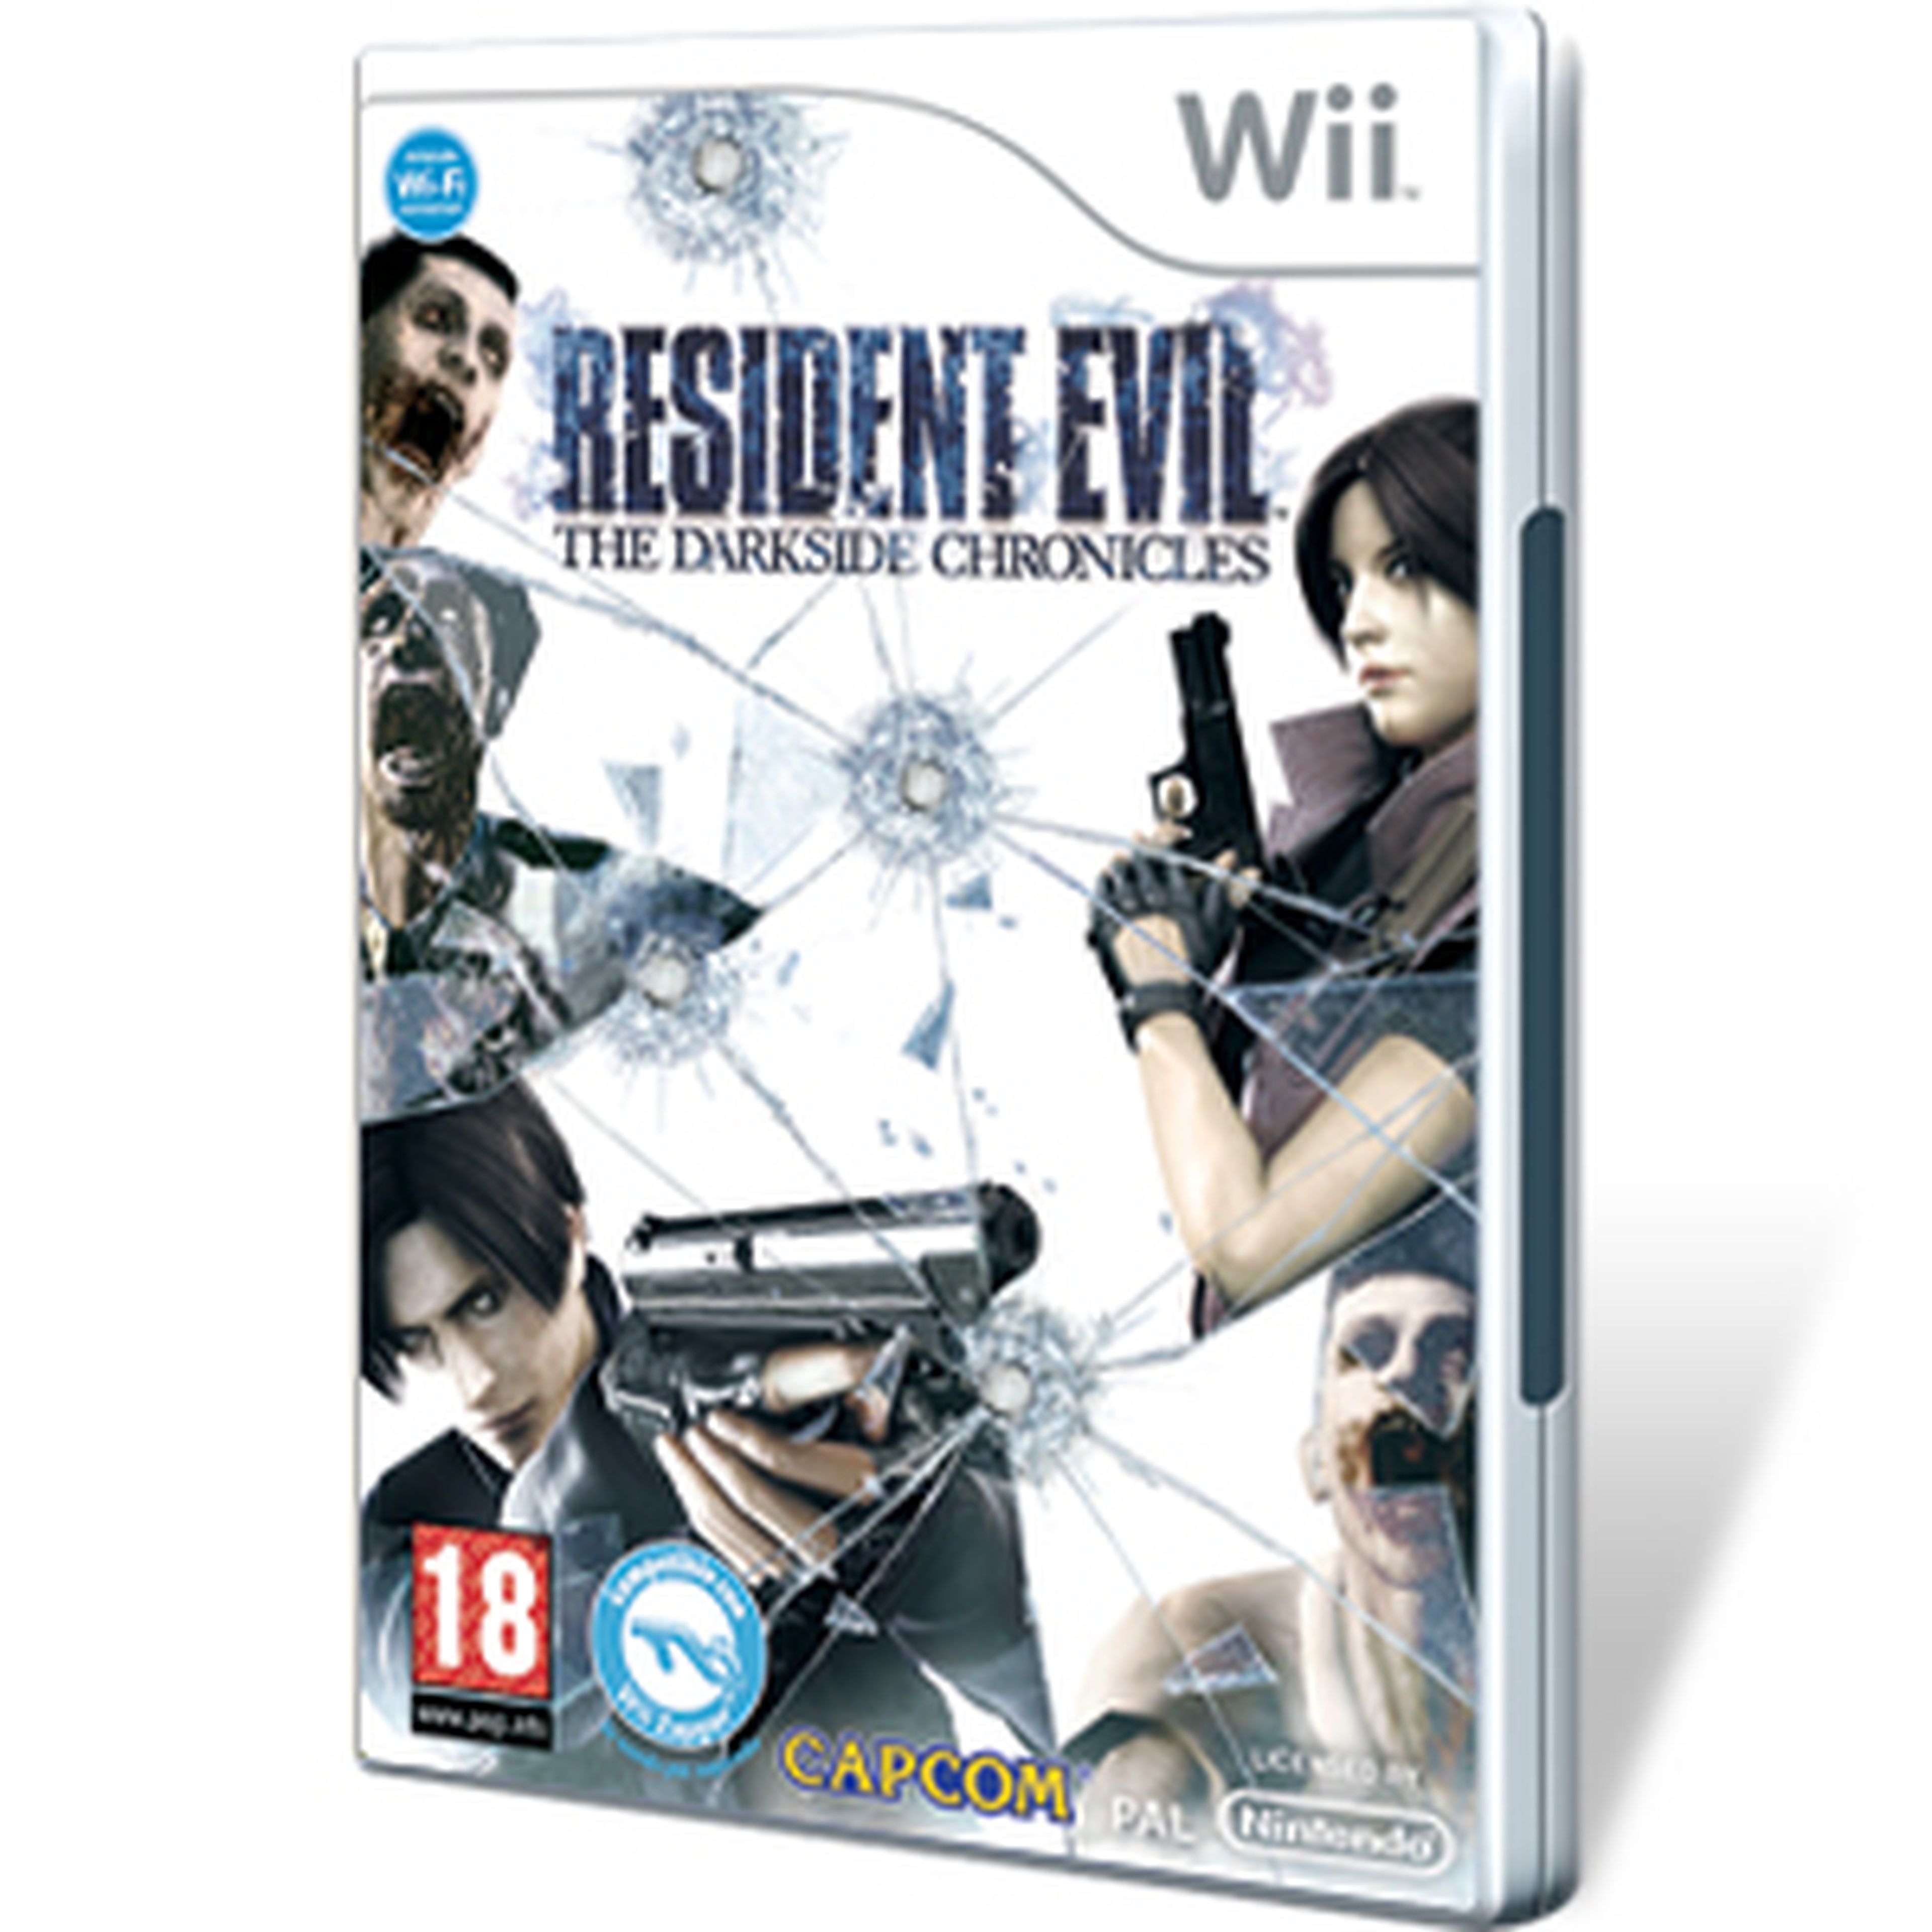 Resident Evil The Darkside Chronicles para Wii